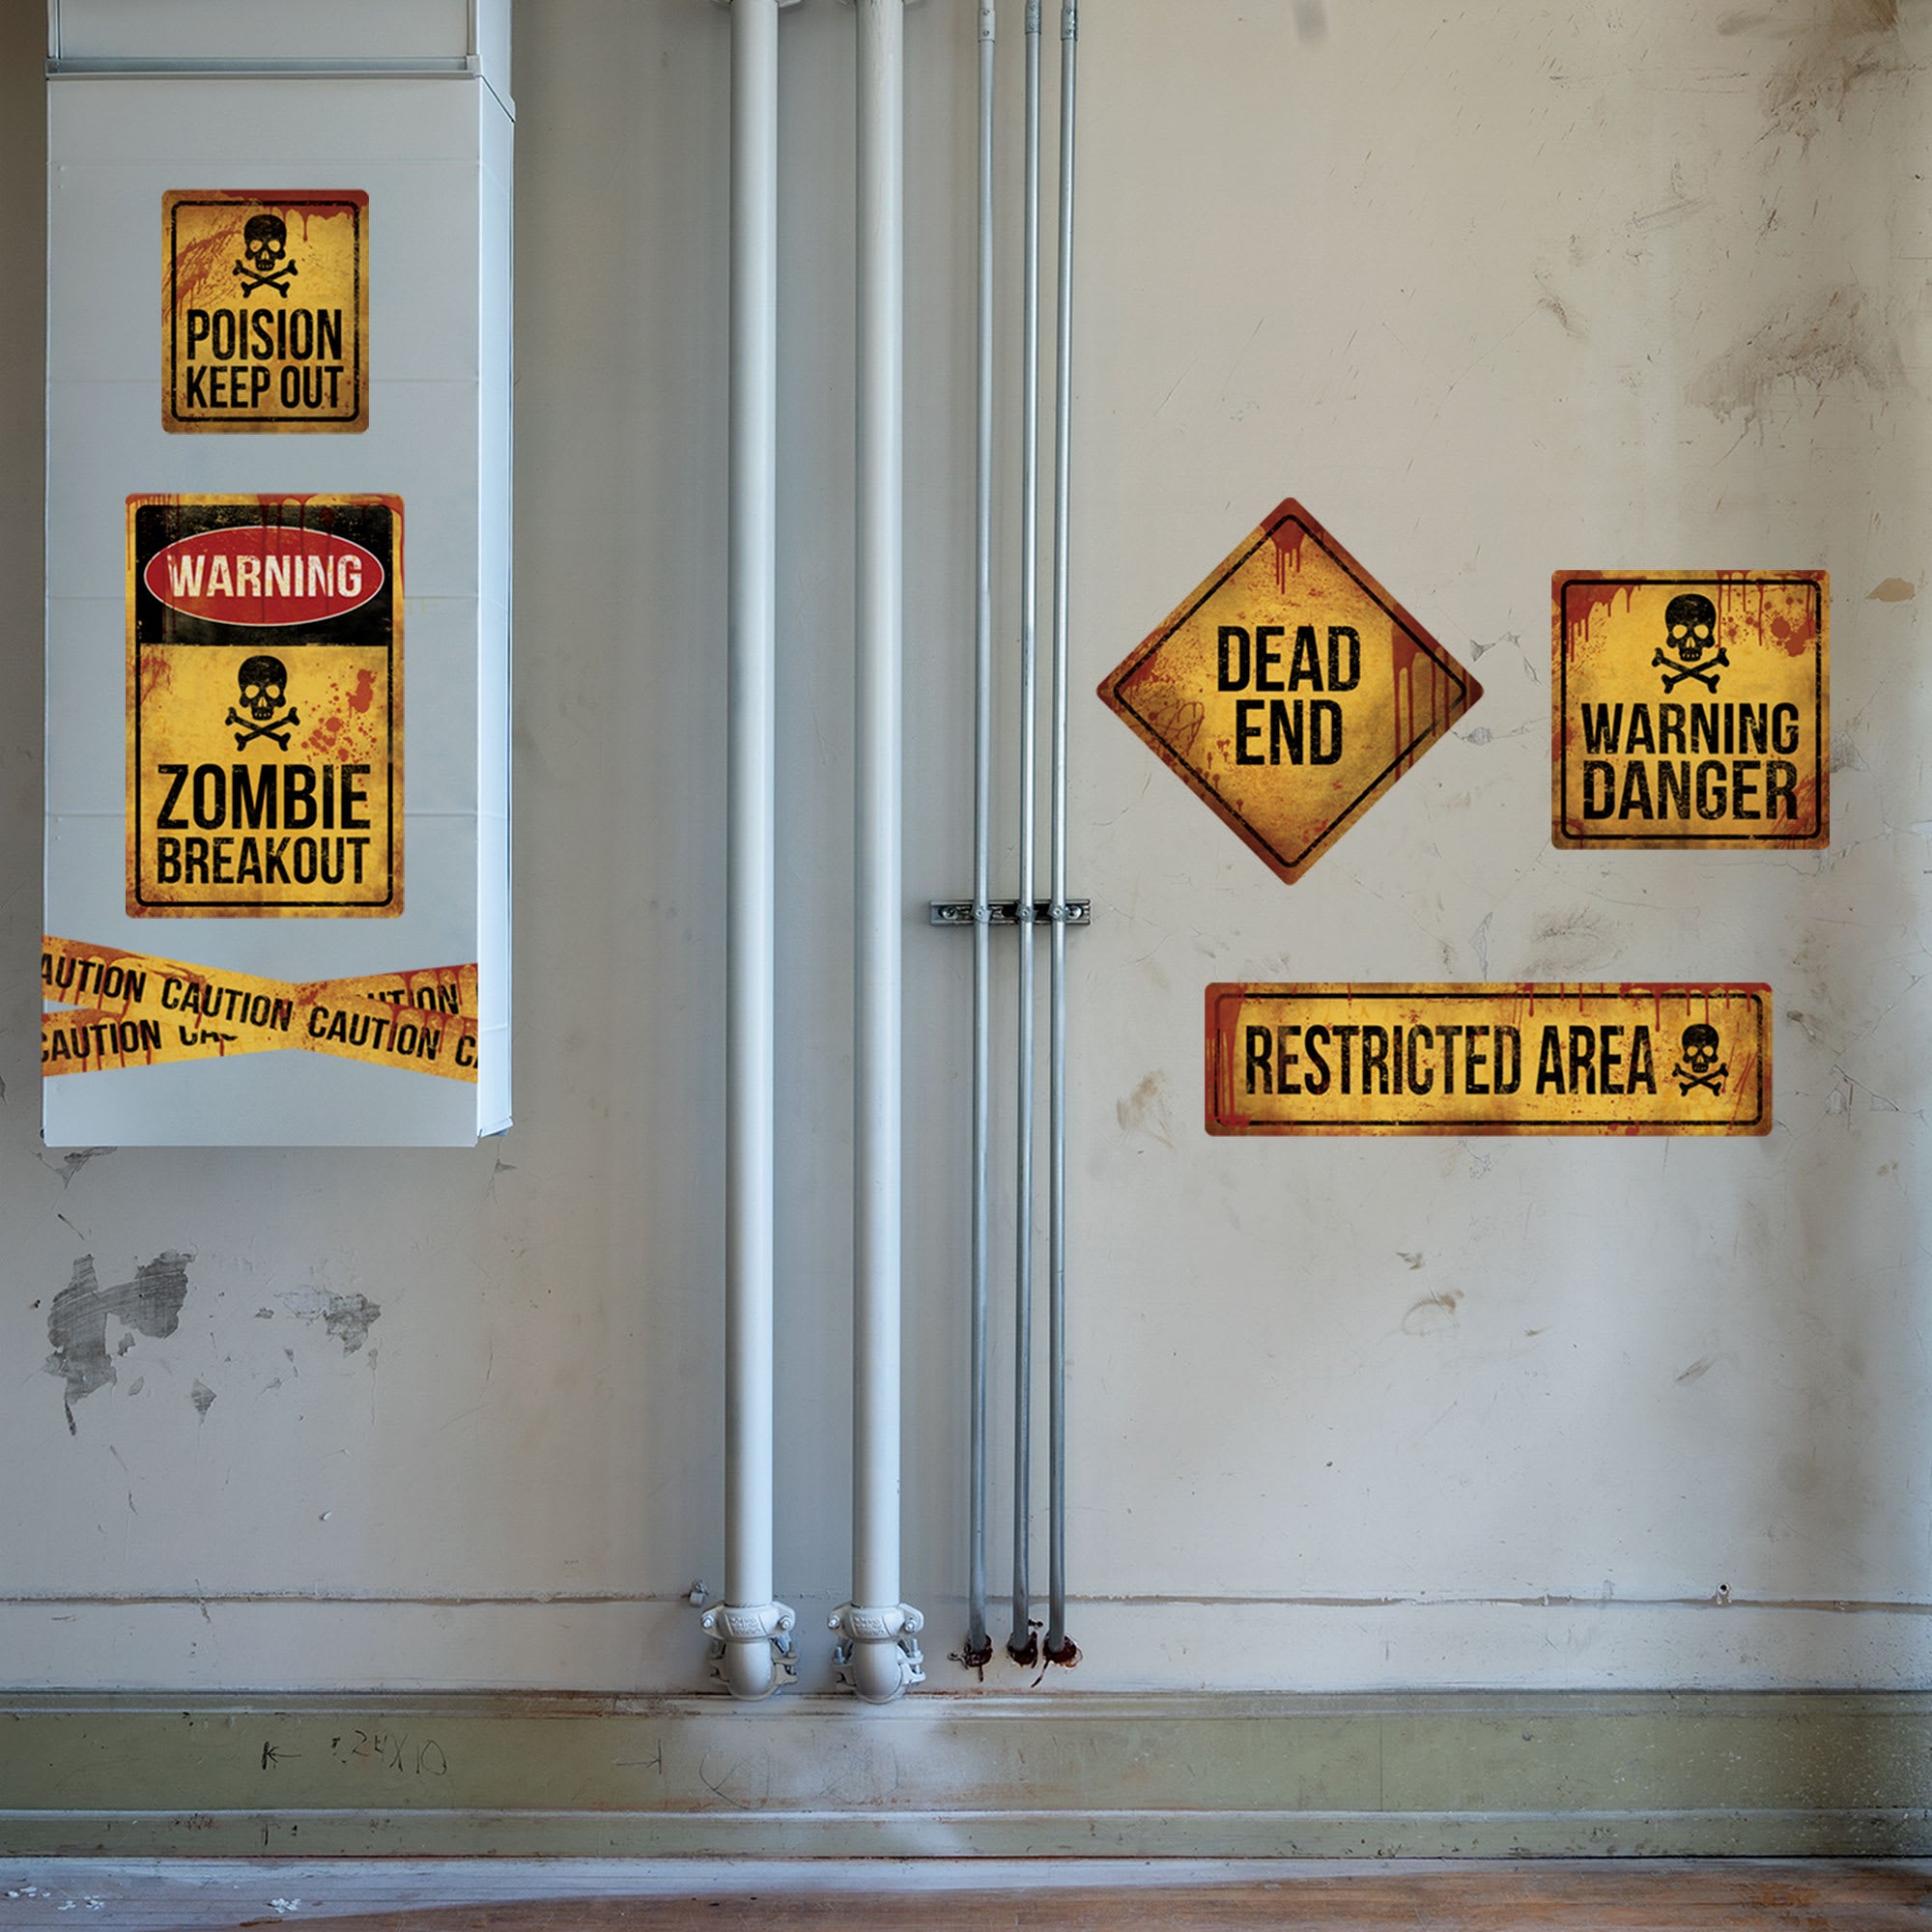 Zombie Outbreak: Caution Sign Collection - Removable Vinyl Decal 54.0"W x 40.0"H by Fathead